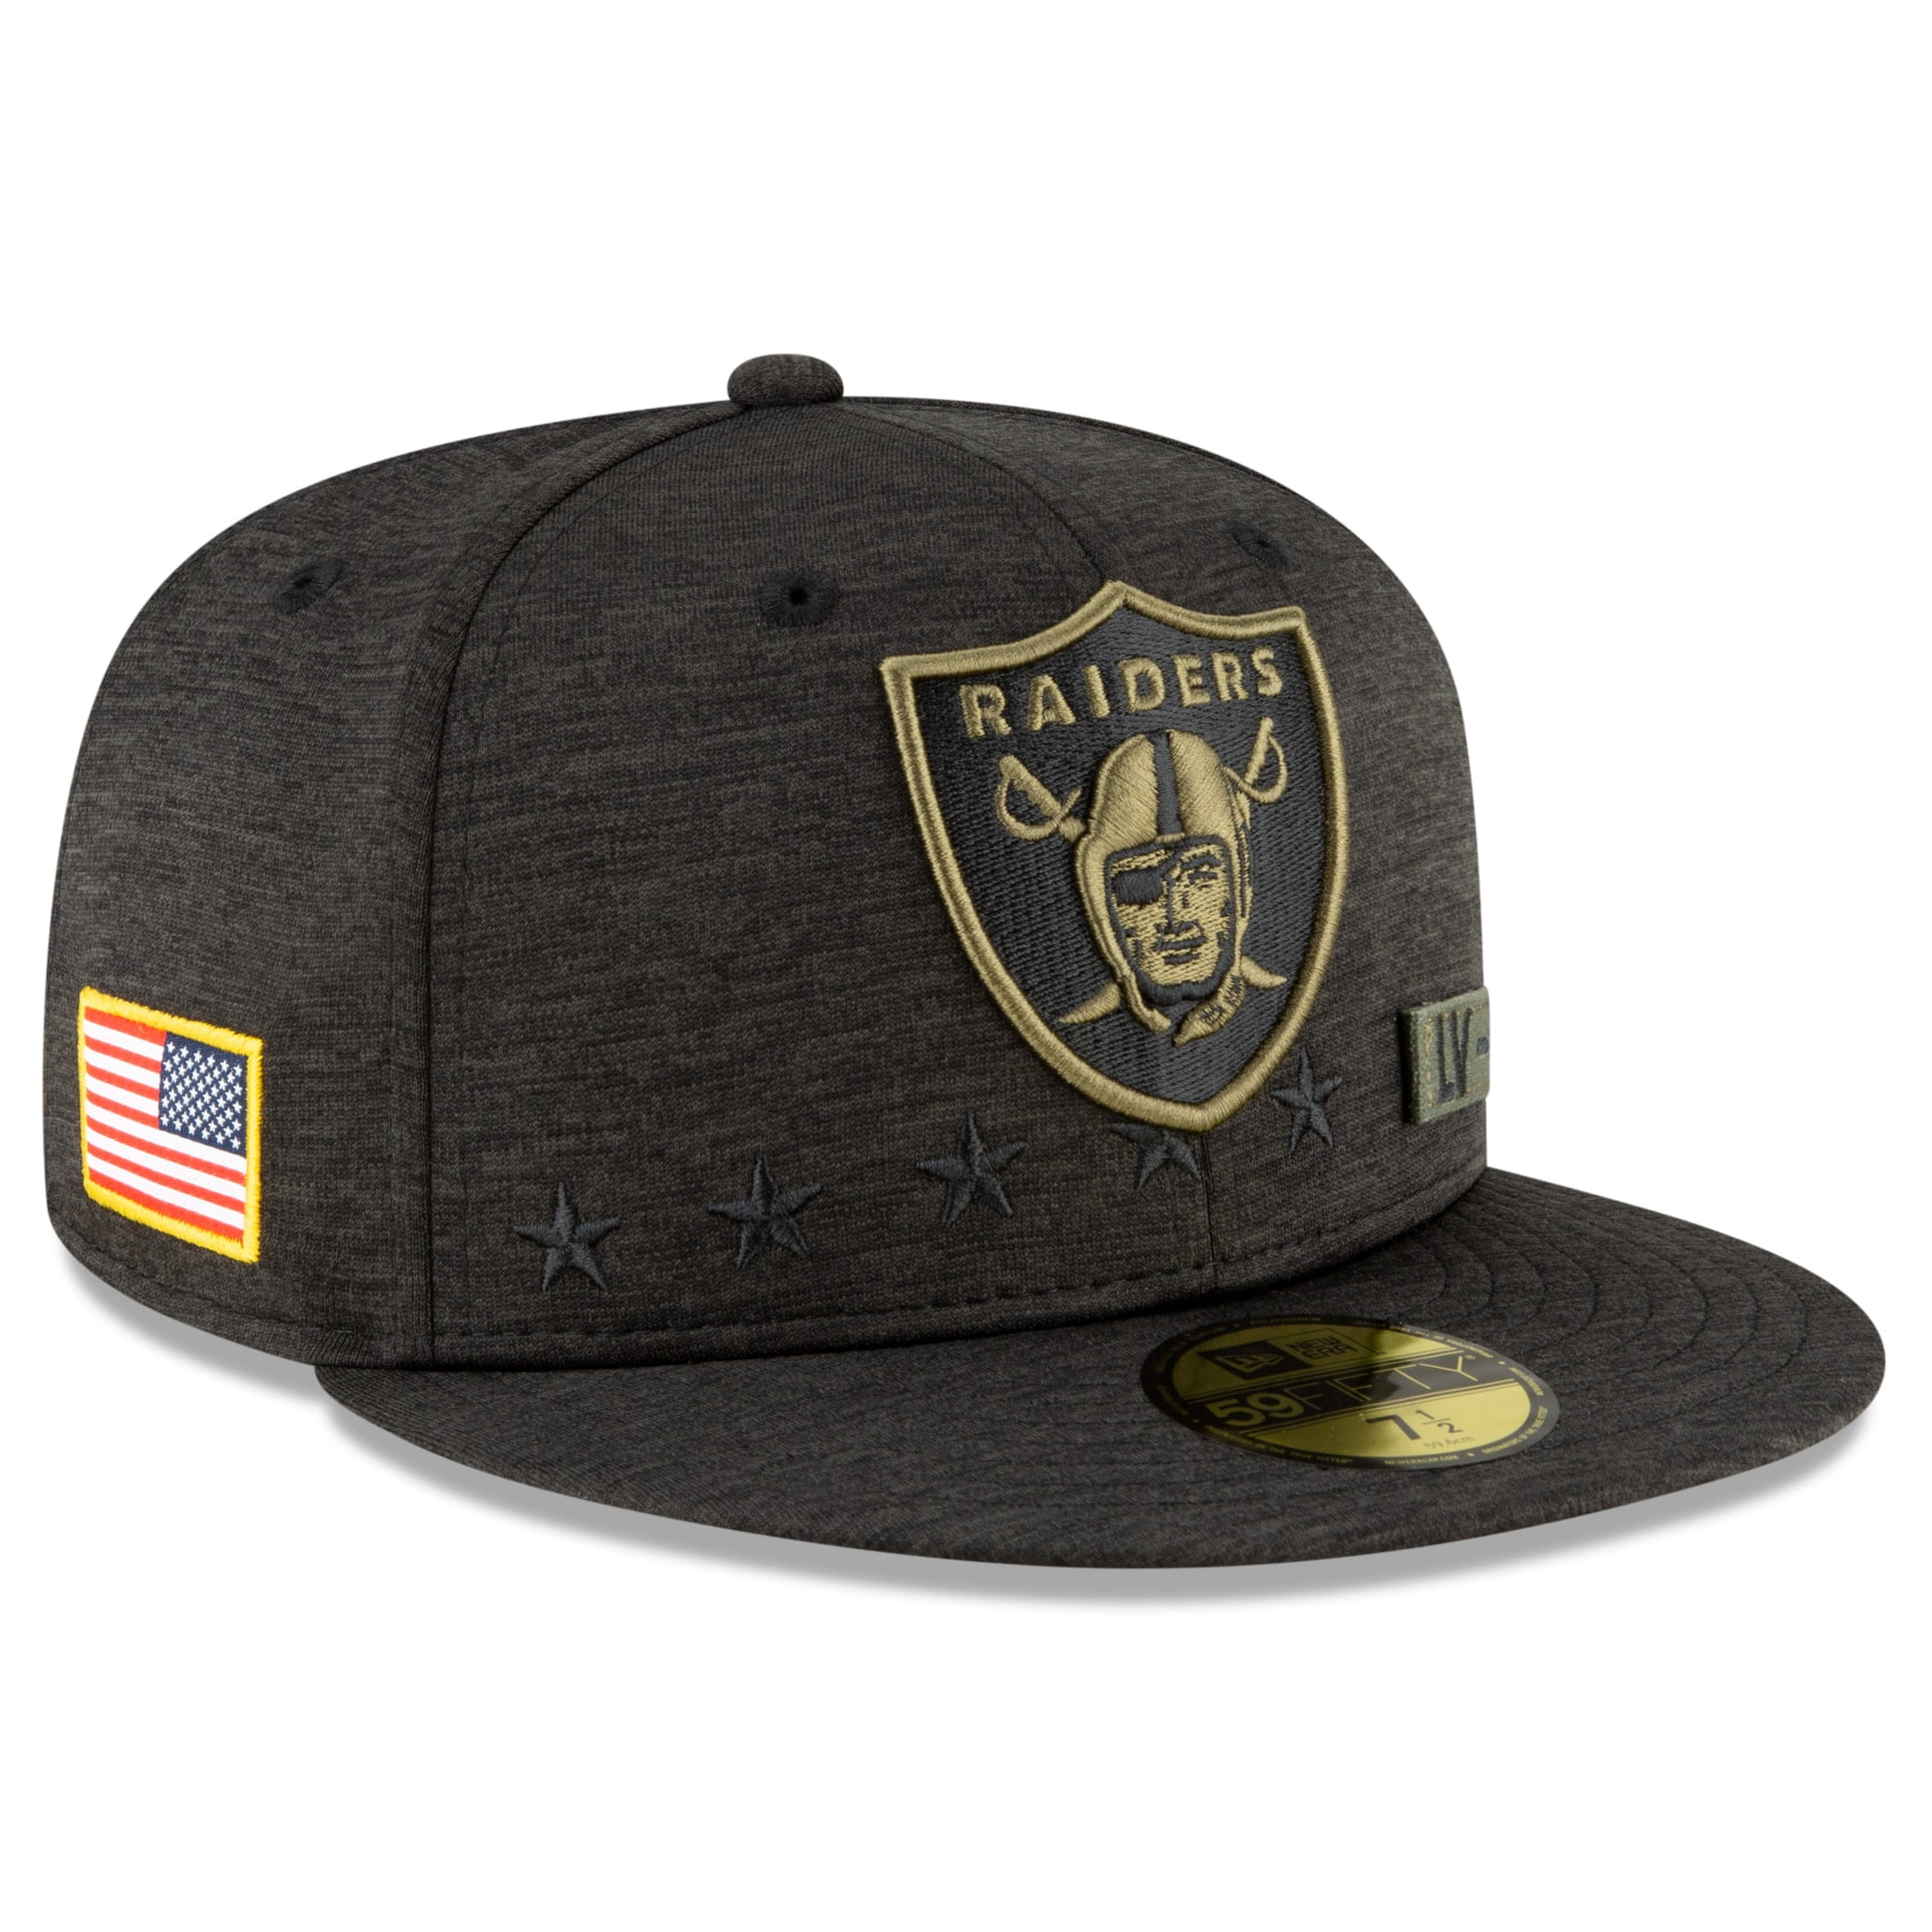 New Era Oakland Raiders On Field 19 Salute to Service STS Black Cap 59fifty 5950 Fitted Limited Edition